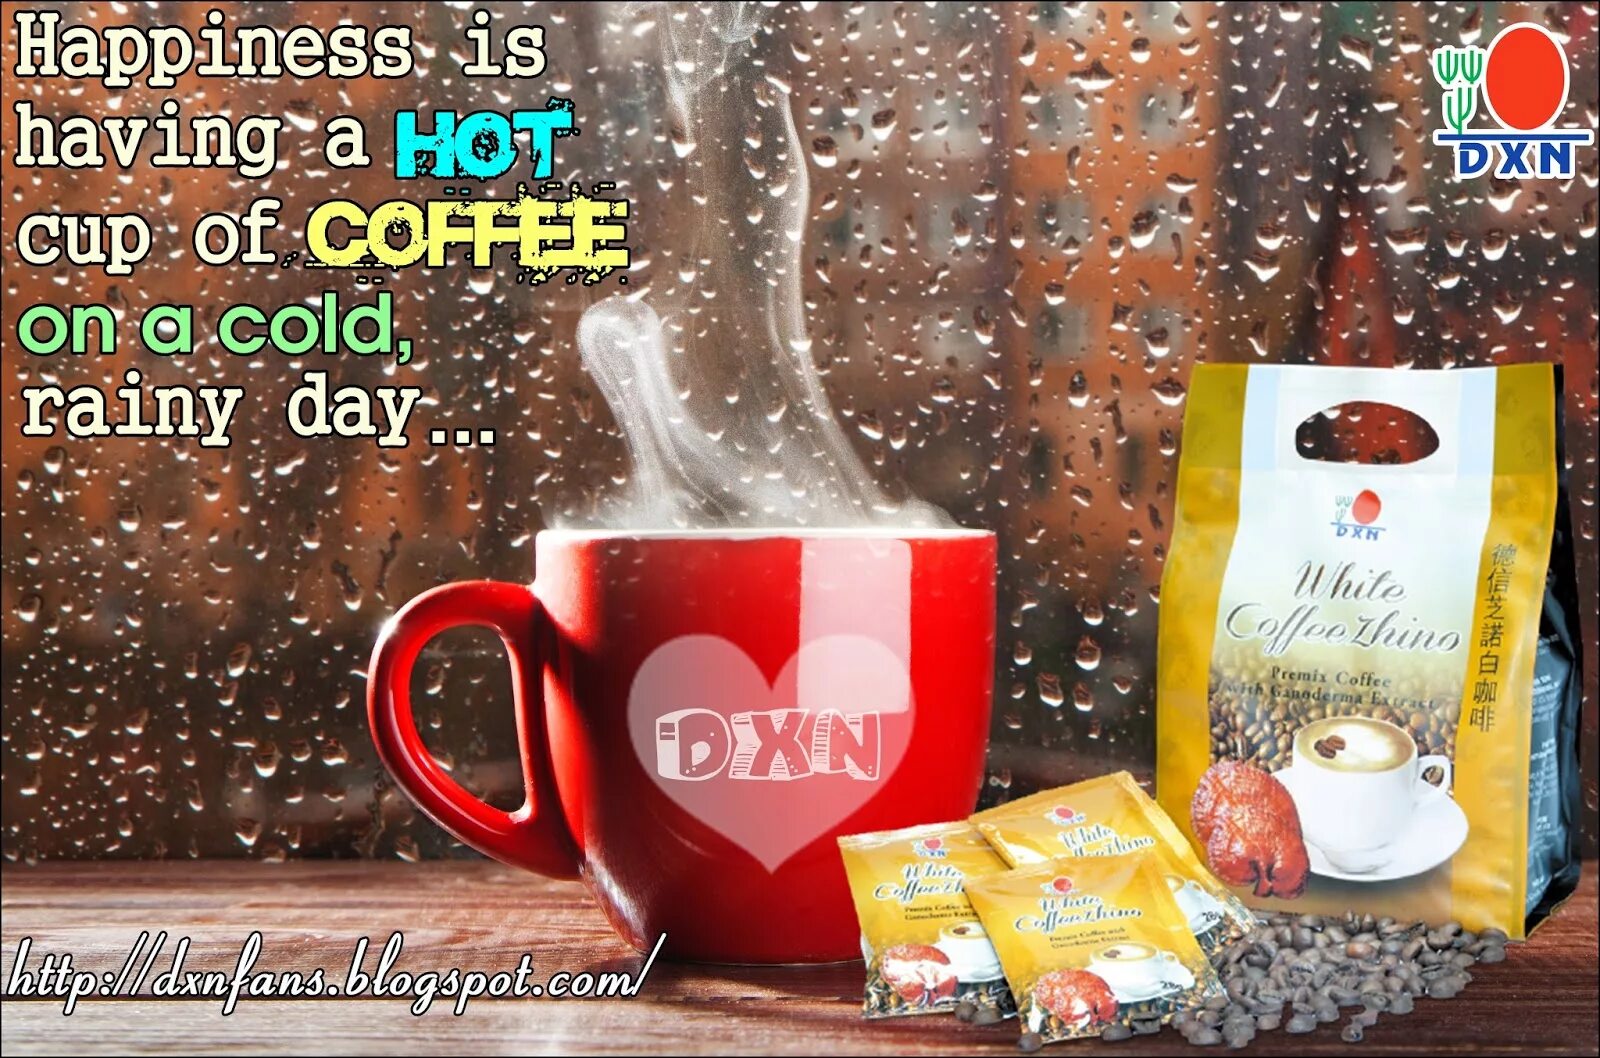 He cold days. DXN Coffee. DXN Vita COFE. Eu Cafe DXN. Enjoy a Cold Day in a warm House Design product.